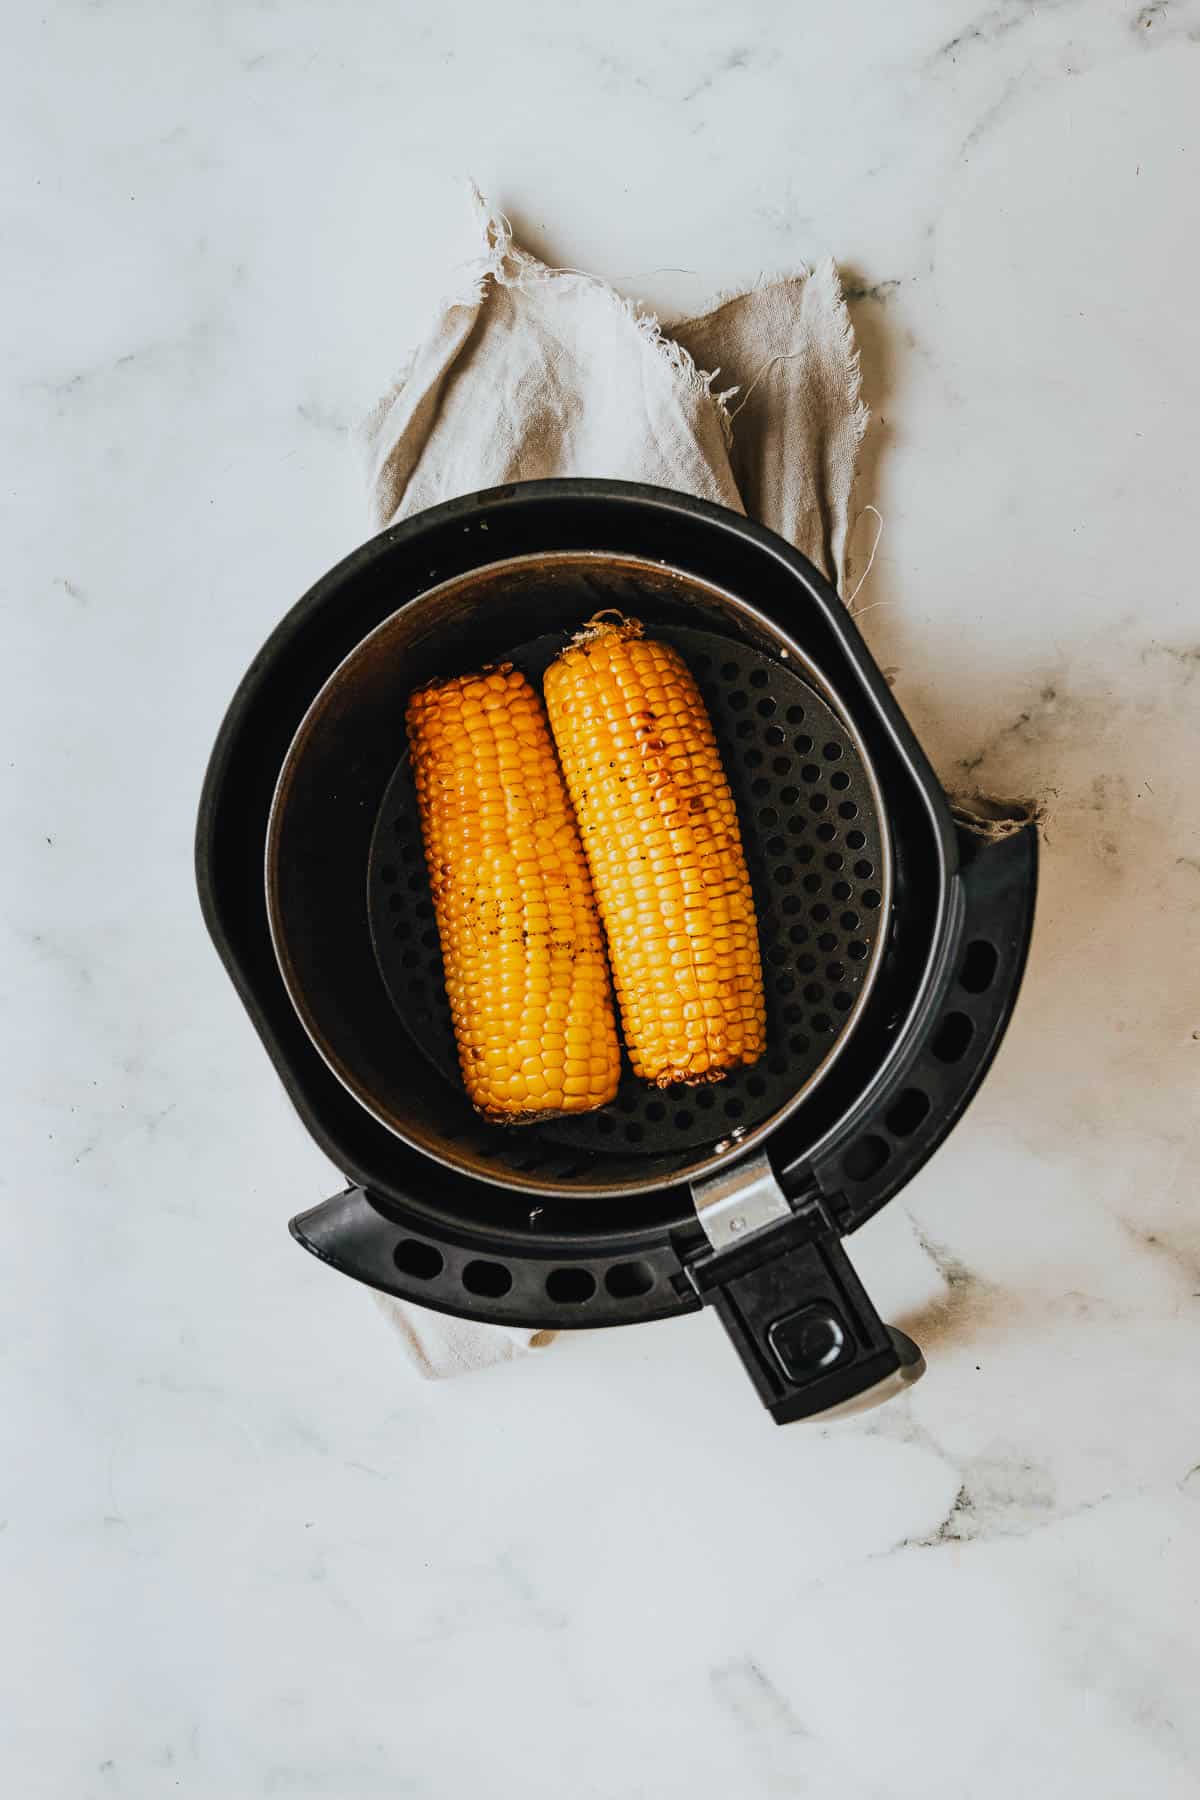 Corn on the cob in an air fryer.